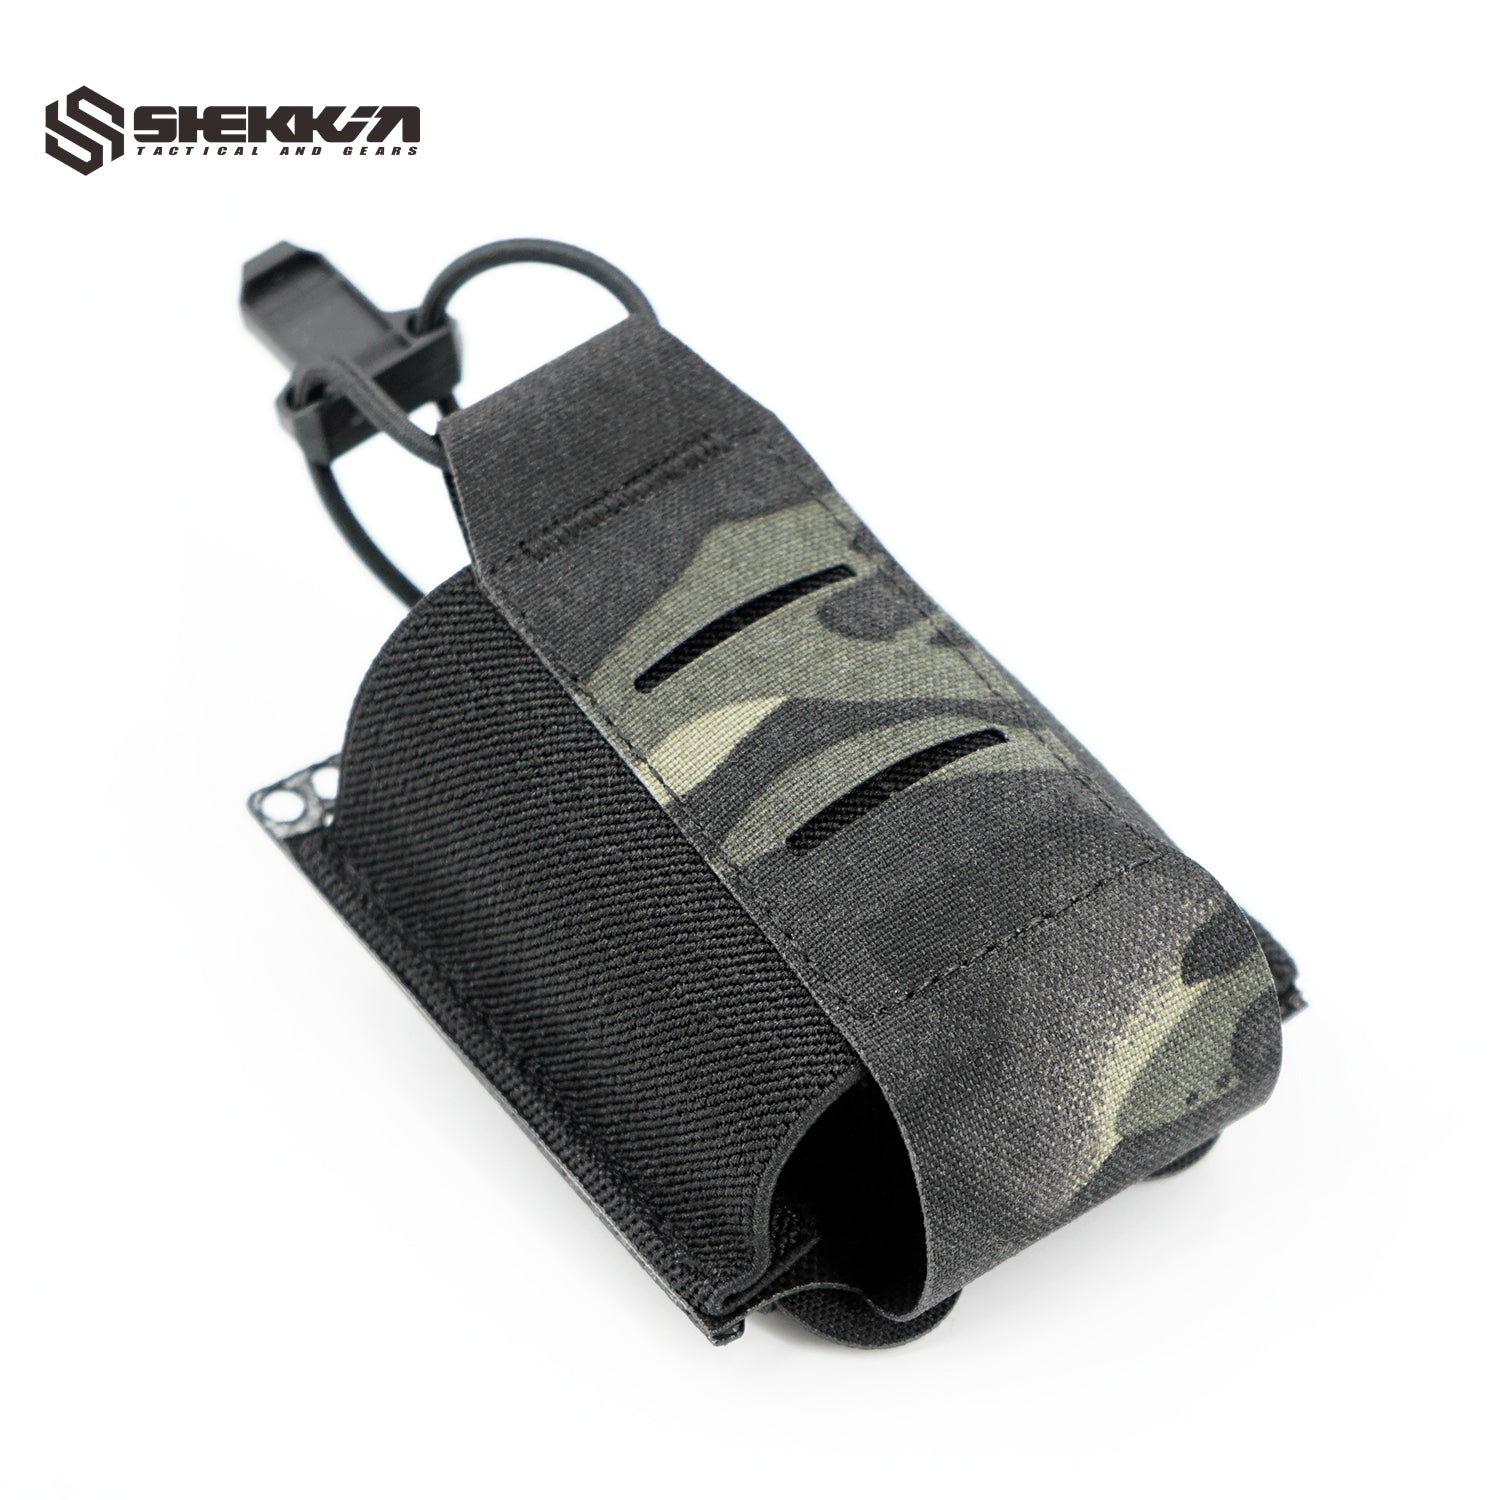 Single 556 m4 mag pouch with Tegris plate